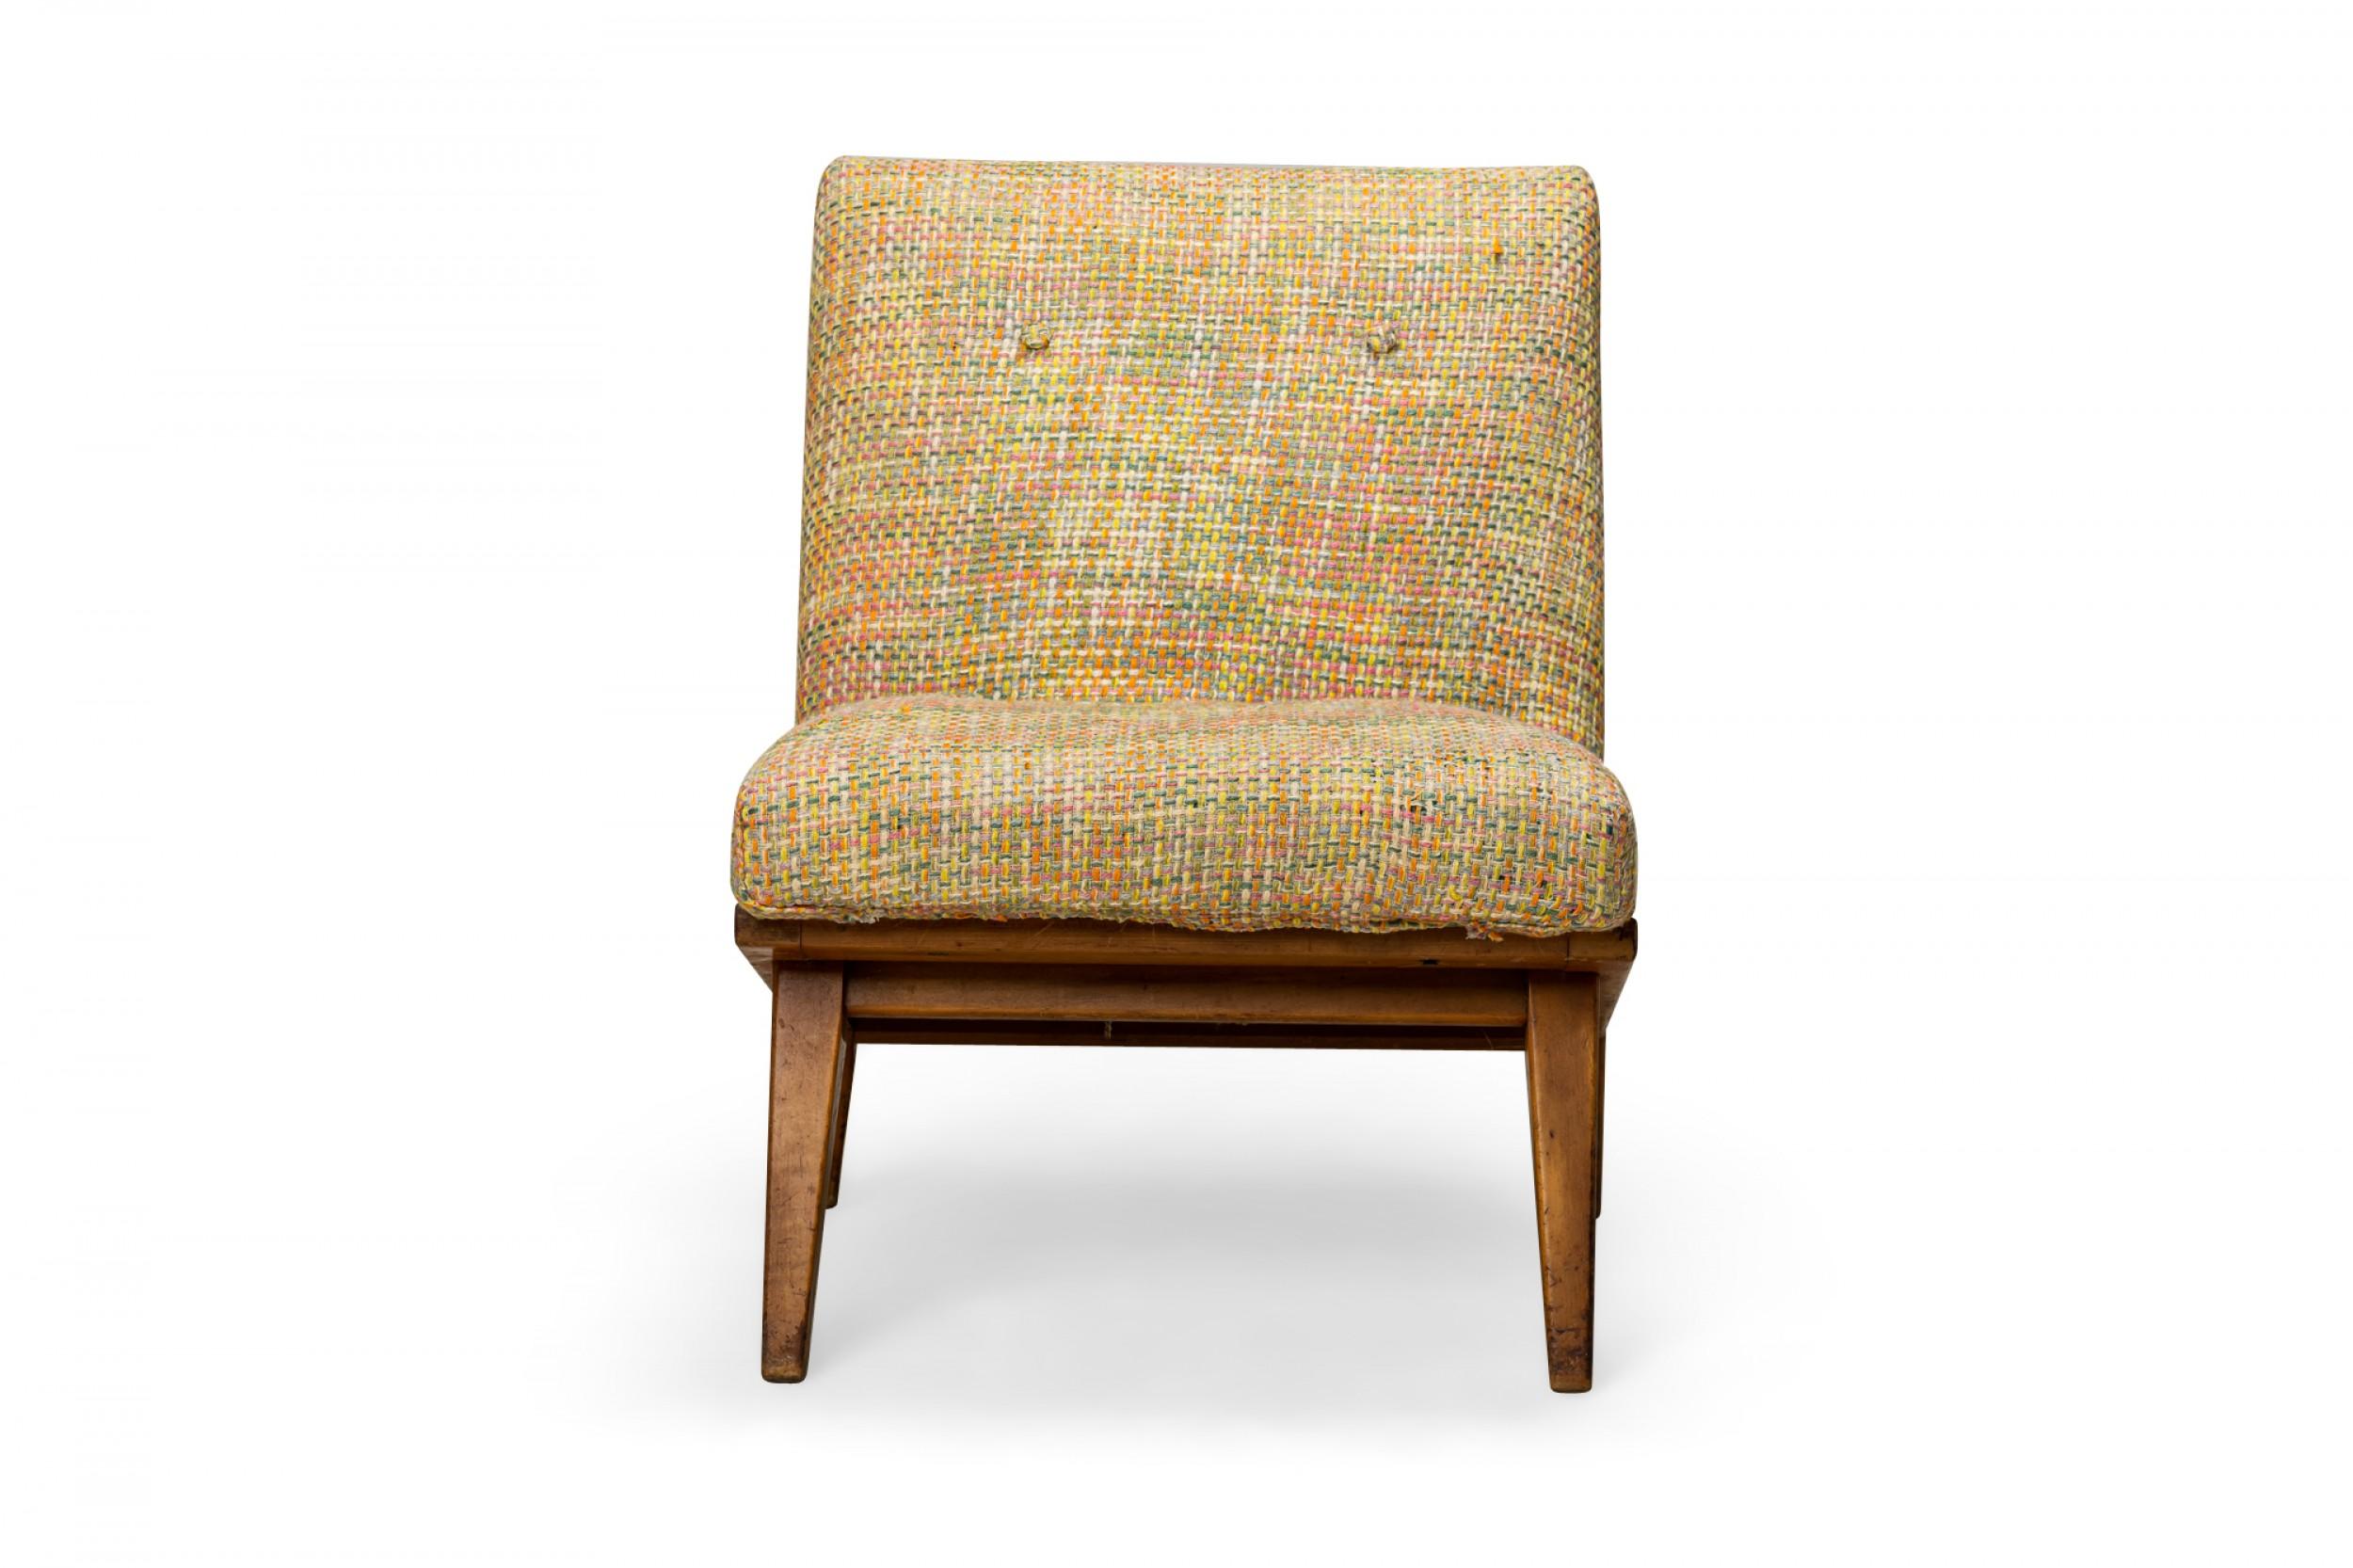 Mid-Century Modern slipper / side chair with woven multi-colored fabric upholstery, resting on an angled blonde wood base with angled and tapered legs. (Jens Risom for Knoll)(Similar pieces: DUF0452-DUF0455).
    